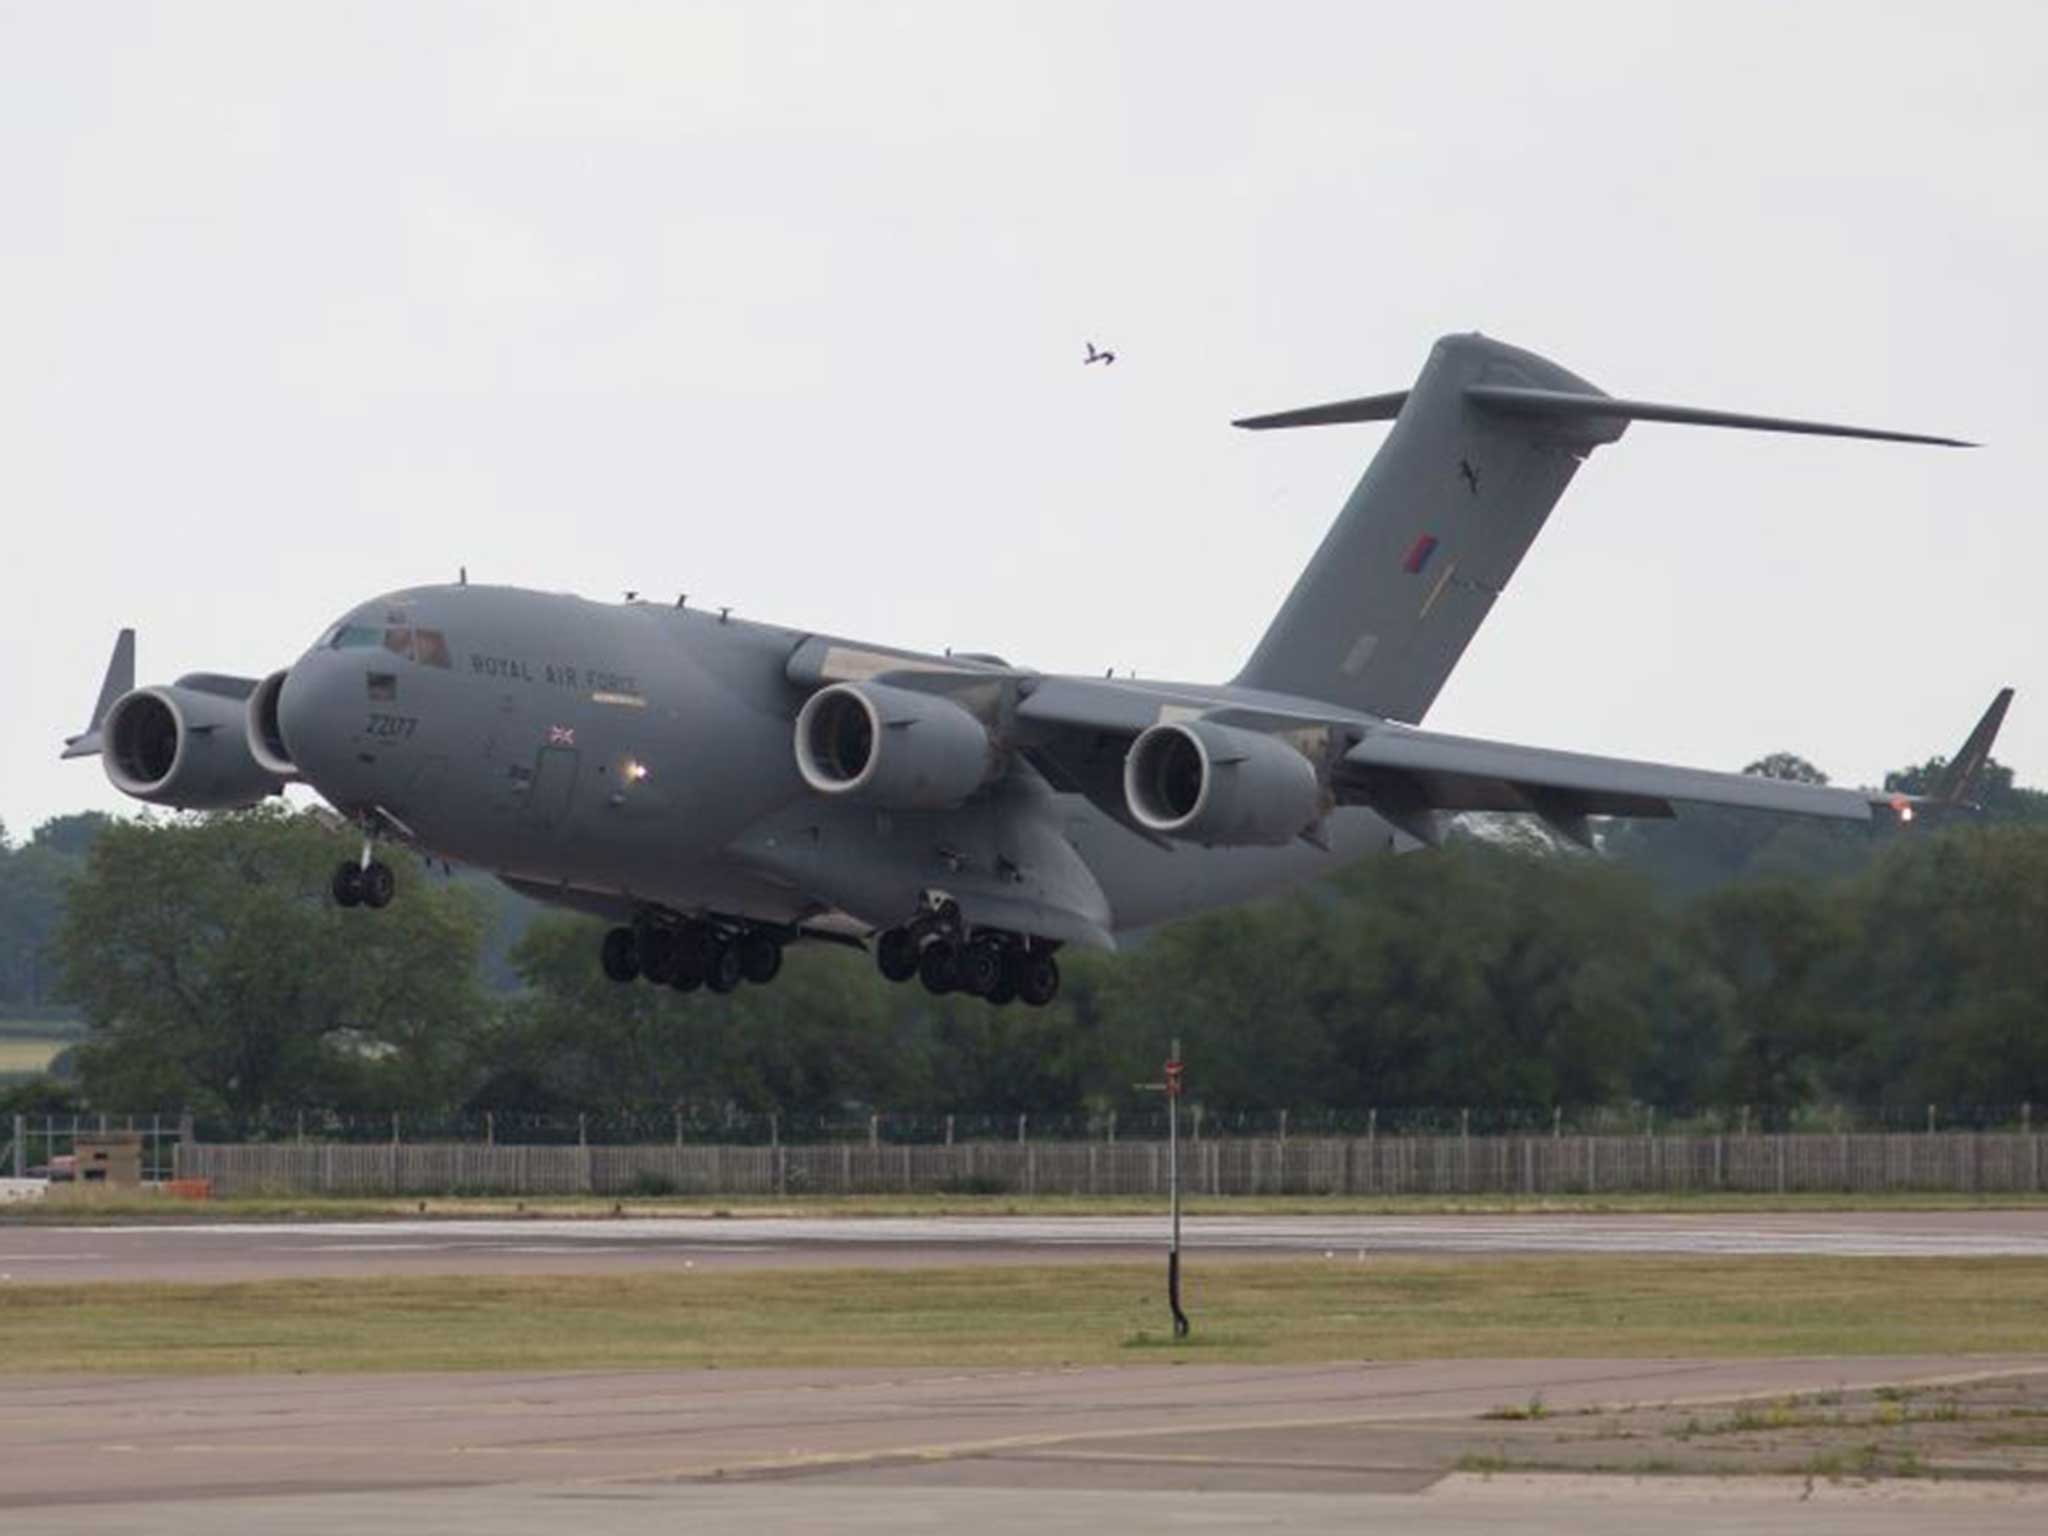 The RAF C-17 touches down in Brize Norton